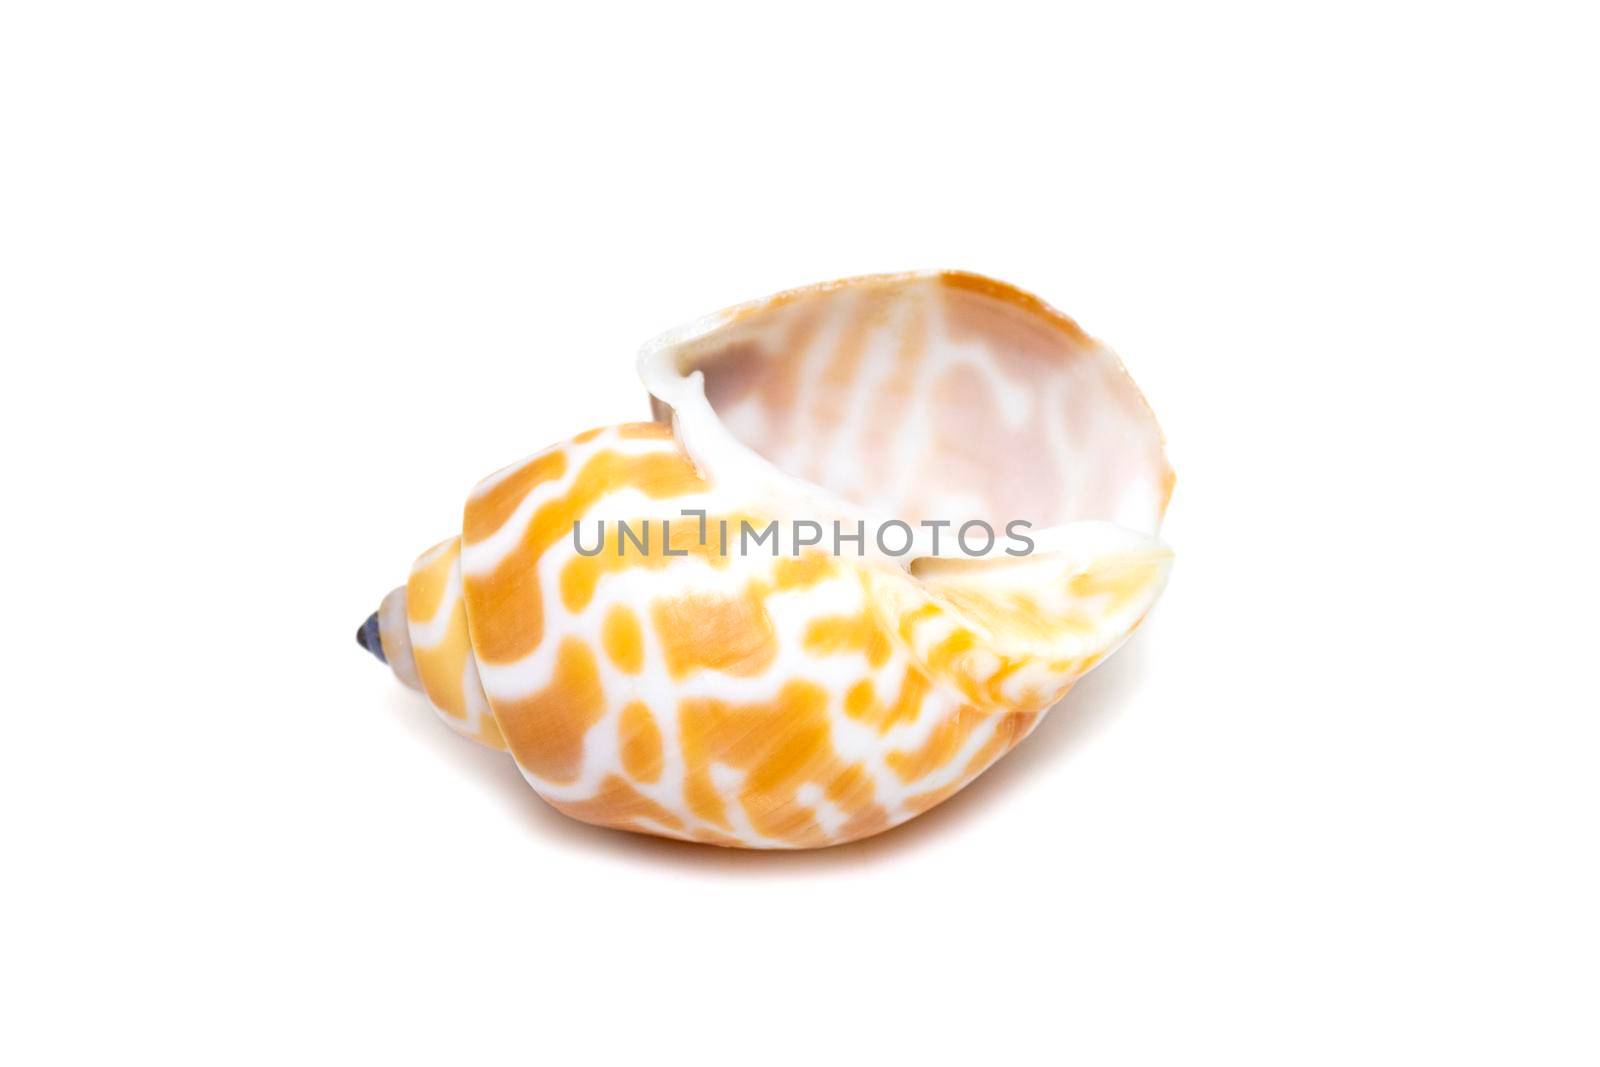 Image of babylonia spirata, common name the Spiral Babylon, is a species of sea snail, a marine gastropod mollusk, in the family Babyloniidae. isolated on white background. Sea snail. Undersea Animals. Sea Shells. by yod67